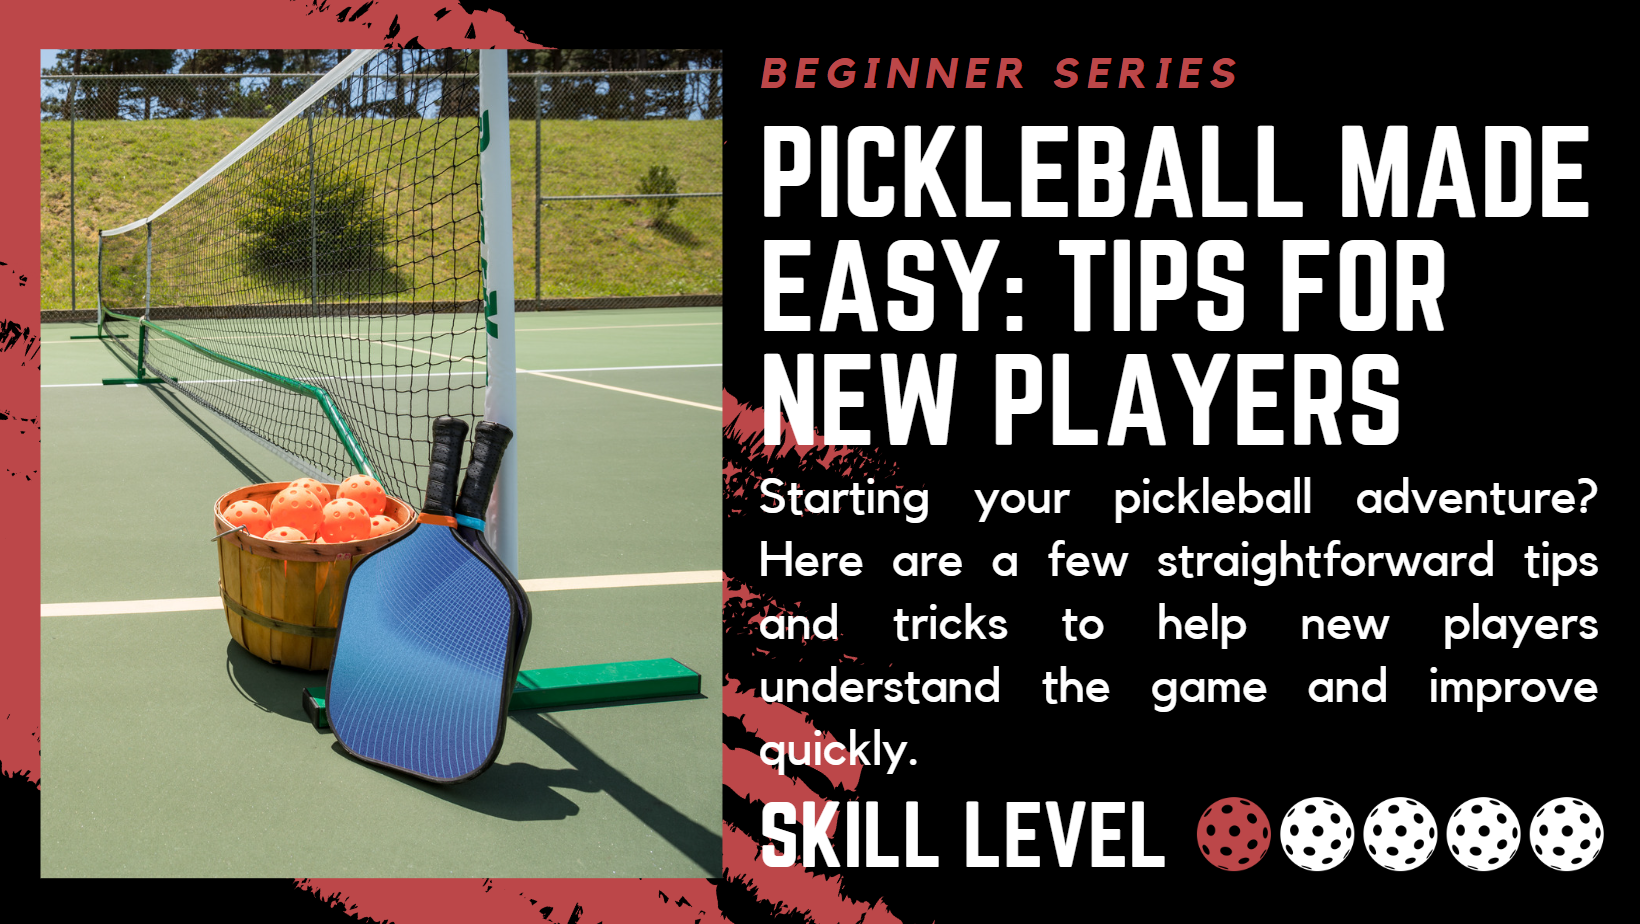 Pickleball Made Easy: Tips for new players. Starting your pickleball adventure? Here are a few straightforward tips and tricks to help new players understand the game and improve quickly. Skill level: 1 of 5